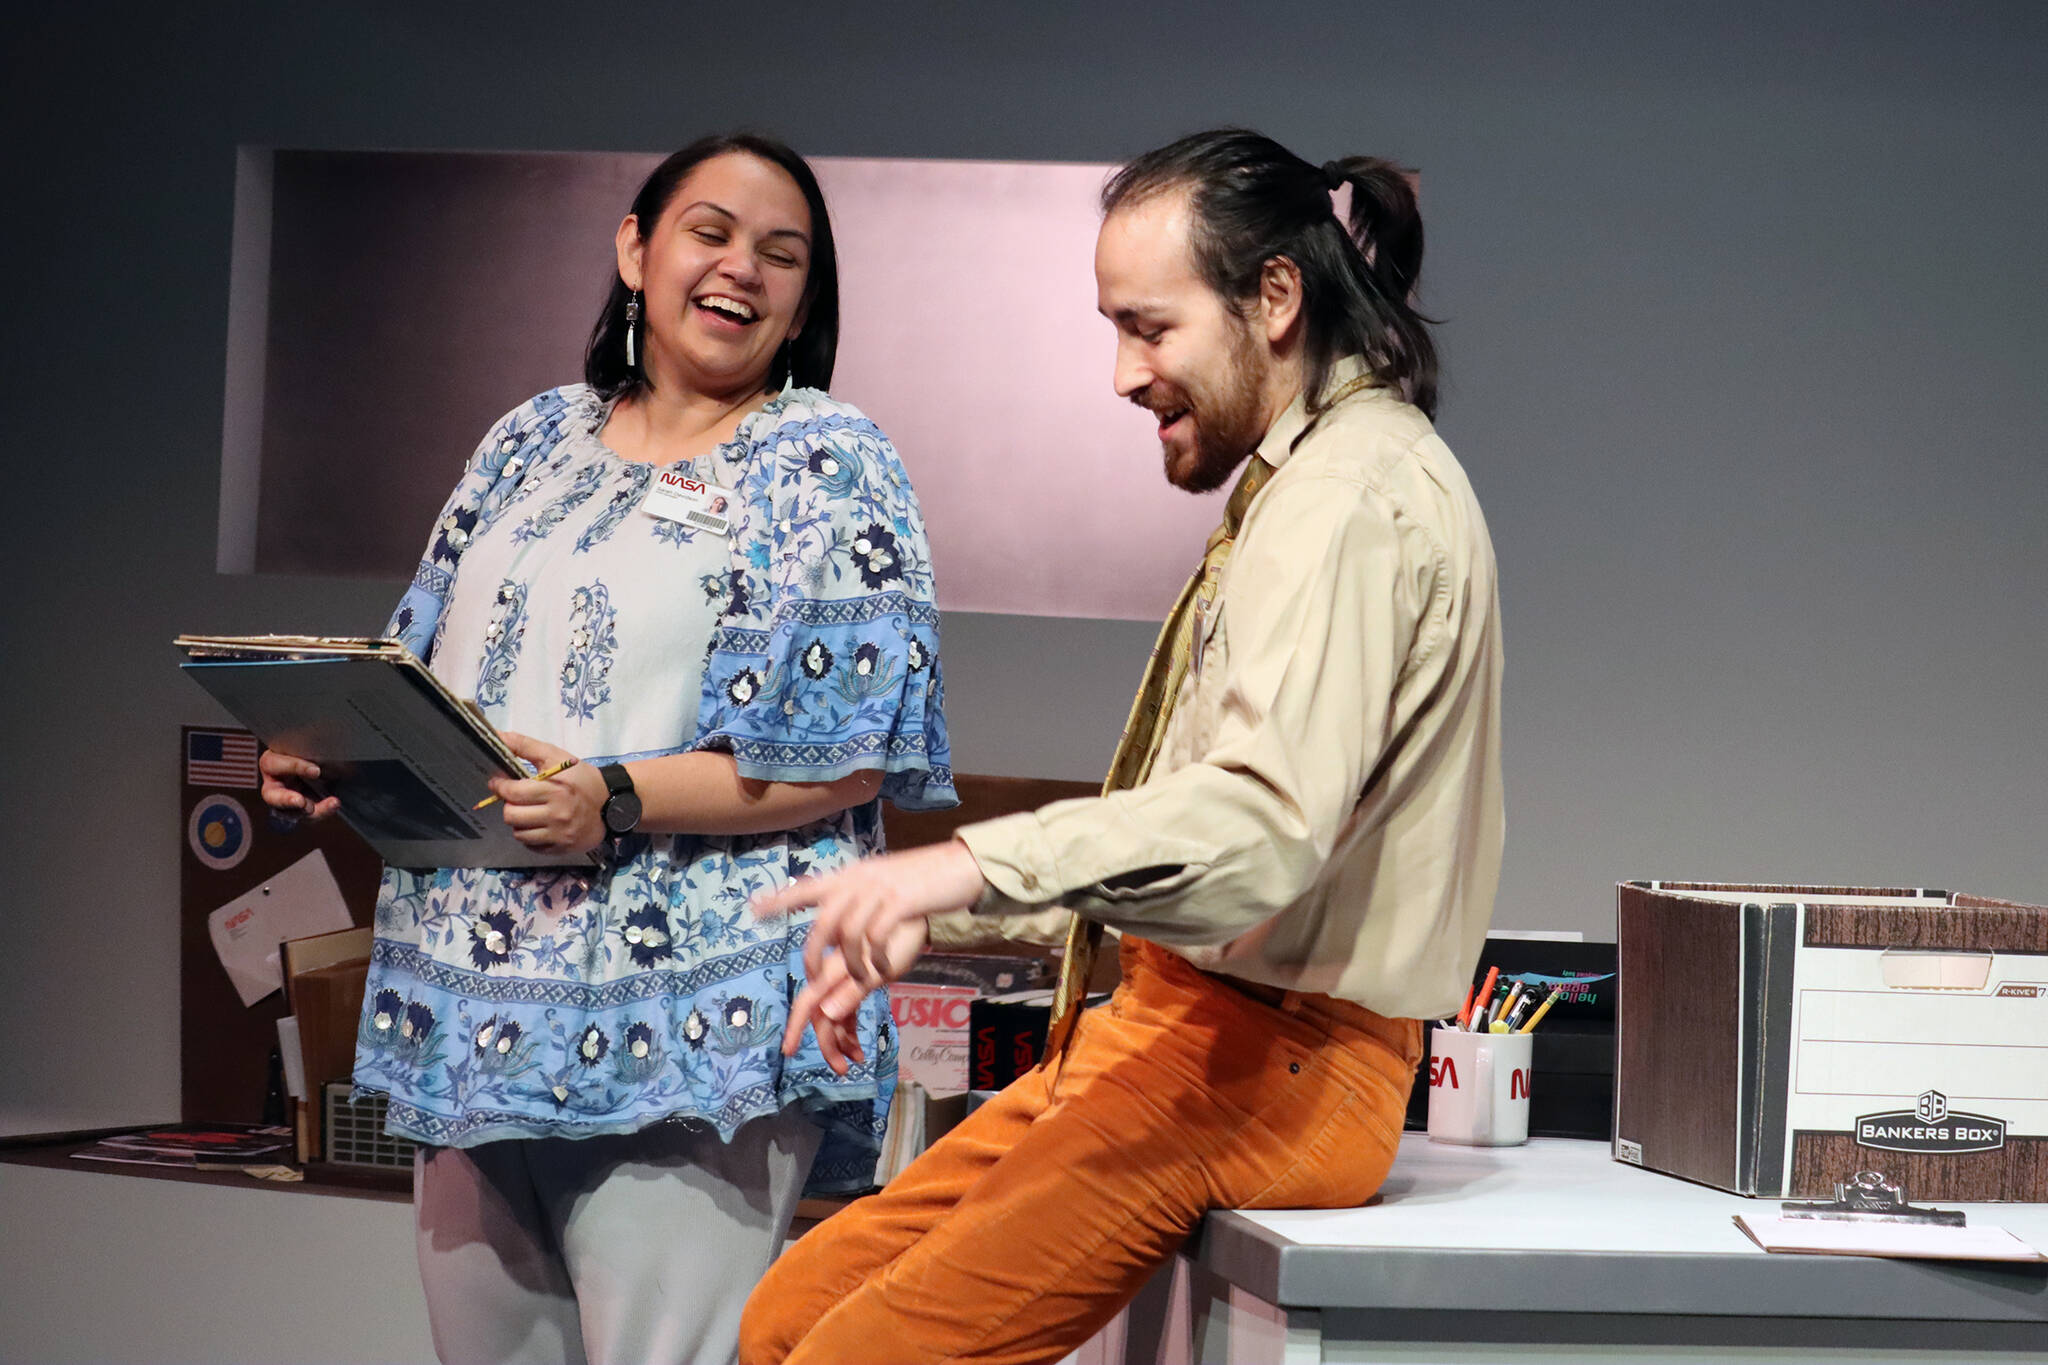 Sarah (Erin Tripp) and Carl (Jared Olin) laugh while working on the Voyager project during a dress rehearsal for Perseverance Theatre's "Voyager One." The play, which is running now, is simultaneously two period pieces. One is set in the '70s, the other is in the distant future. (Ben Hohenstatt / Juneau Empire)